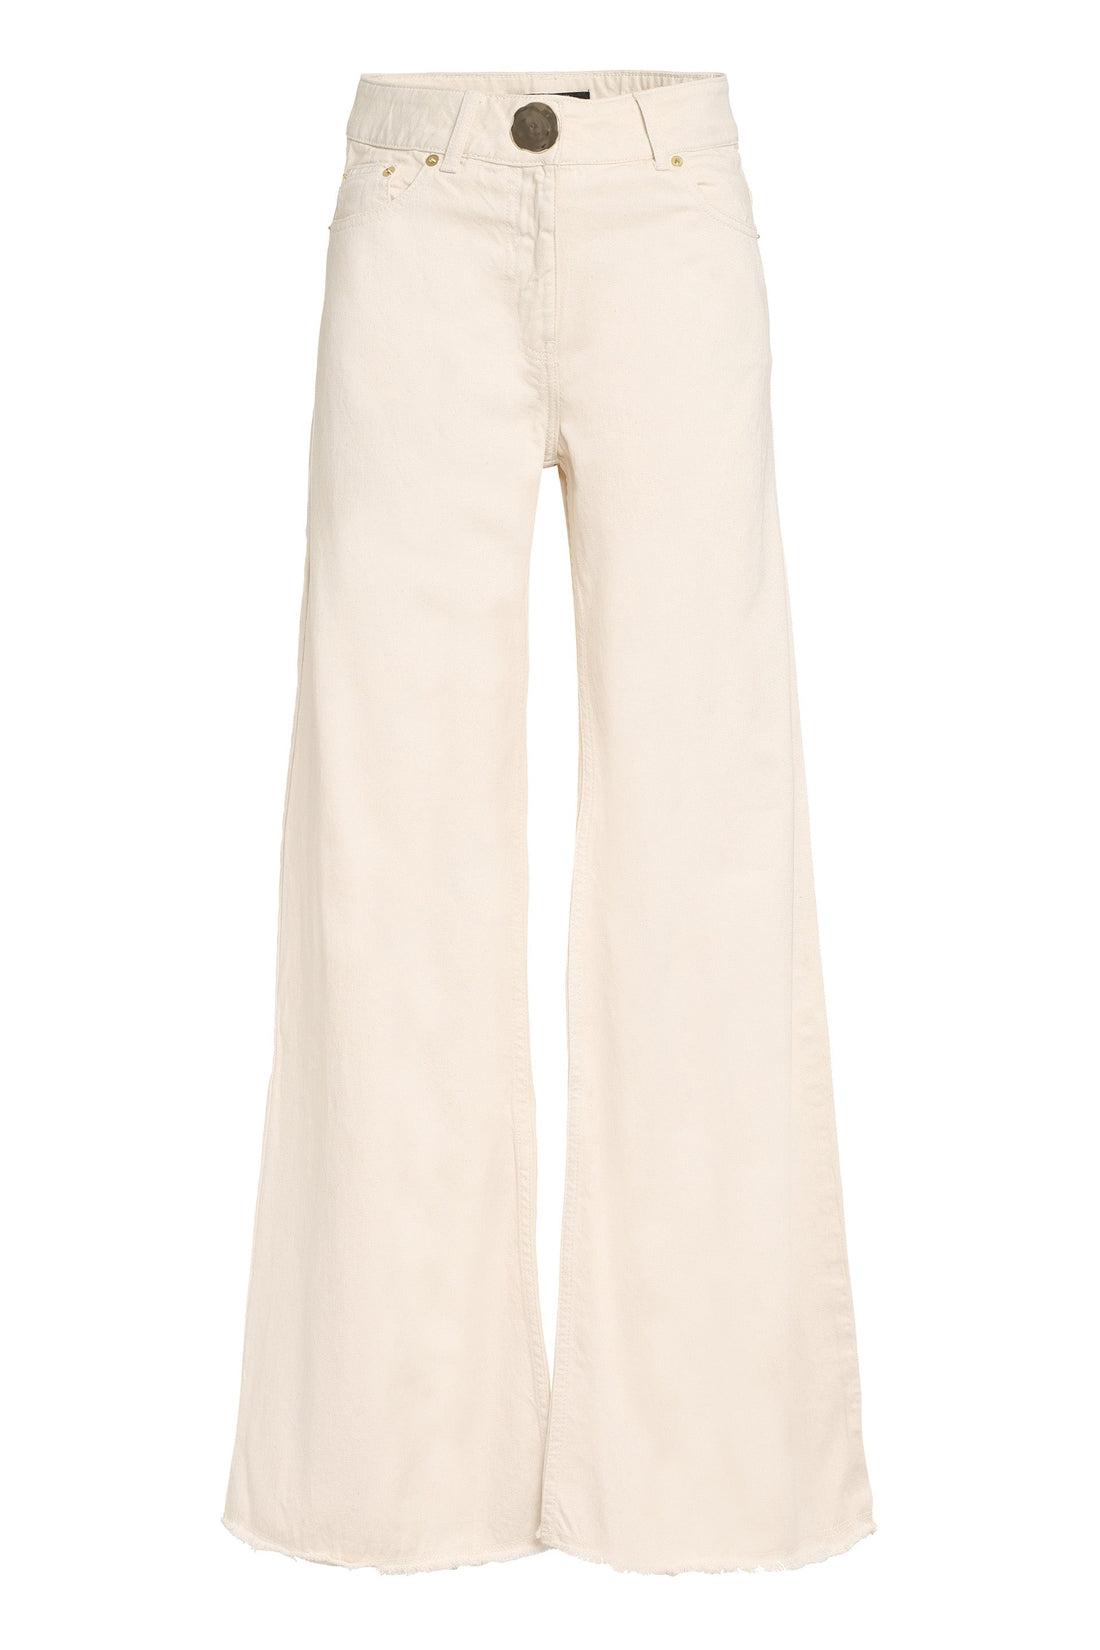 MOTHER OF PEARL-OUTLET-SALE-Chloe high-waist wide-leg jeans-ARCHIVIST